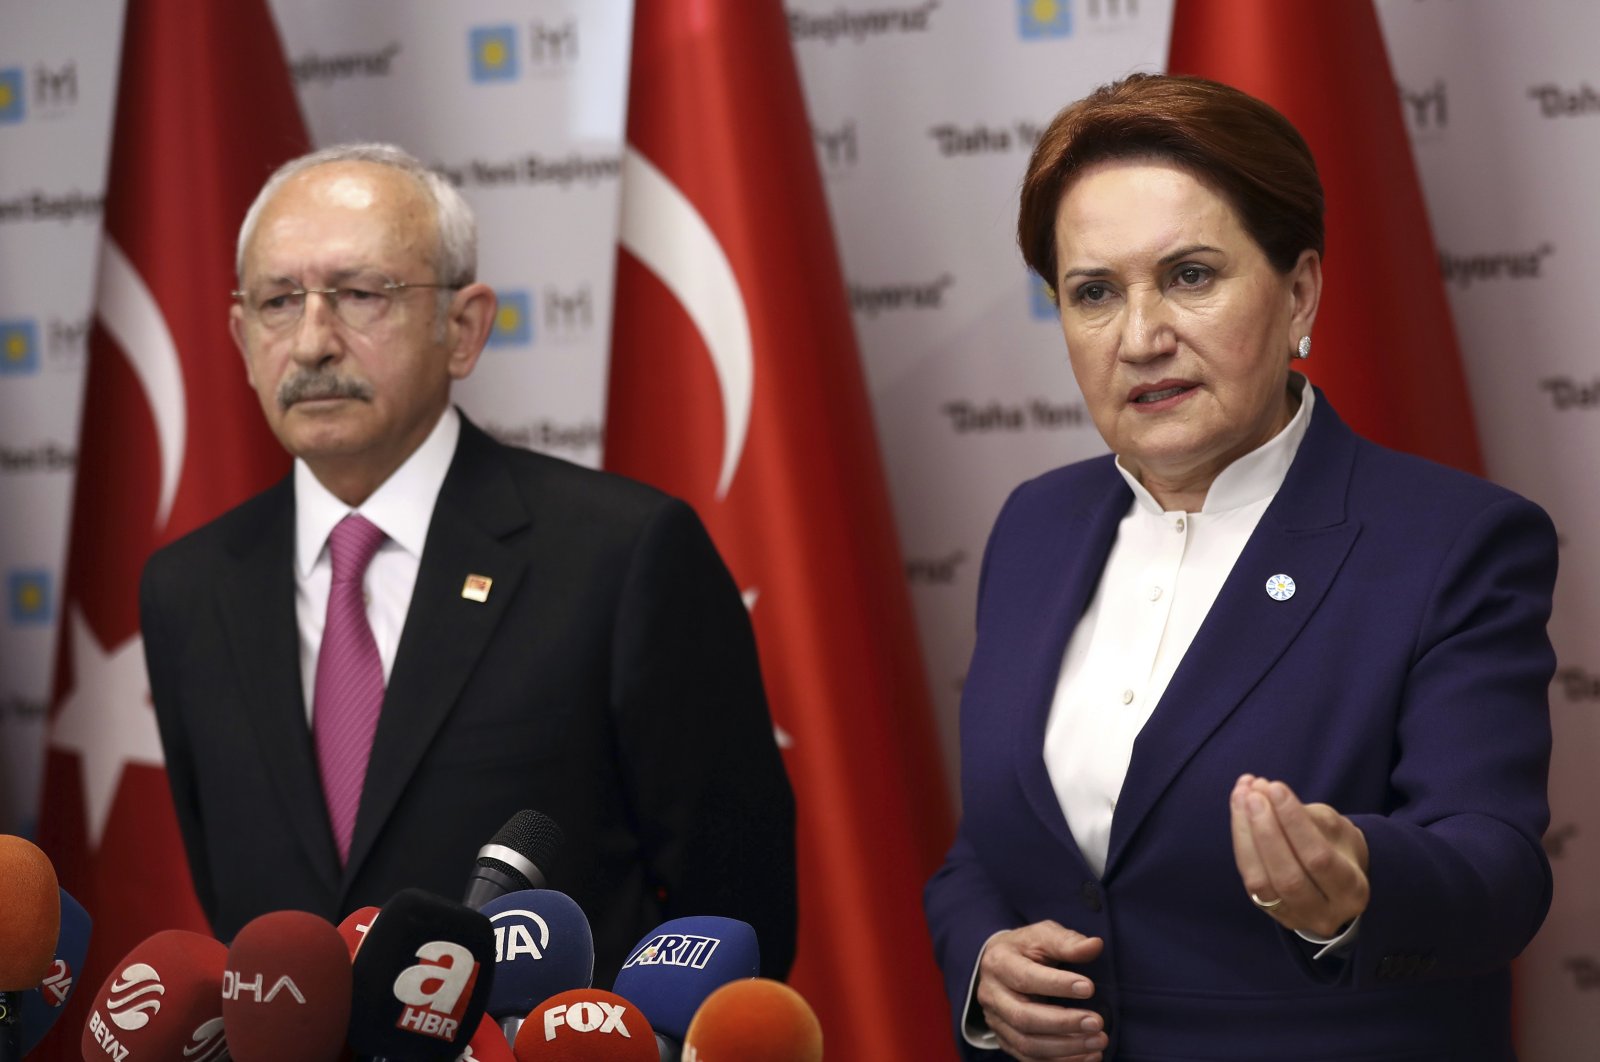 Main opposition Republican People's Party (CHP) Chairperson Kemal Kılıçdaroğlu (L) and Good Party (IP) Chairperson Meral Akşener speak to the media, in the capital Ankara, Turkey, April 8, 2019. (AP Photo)